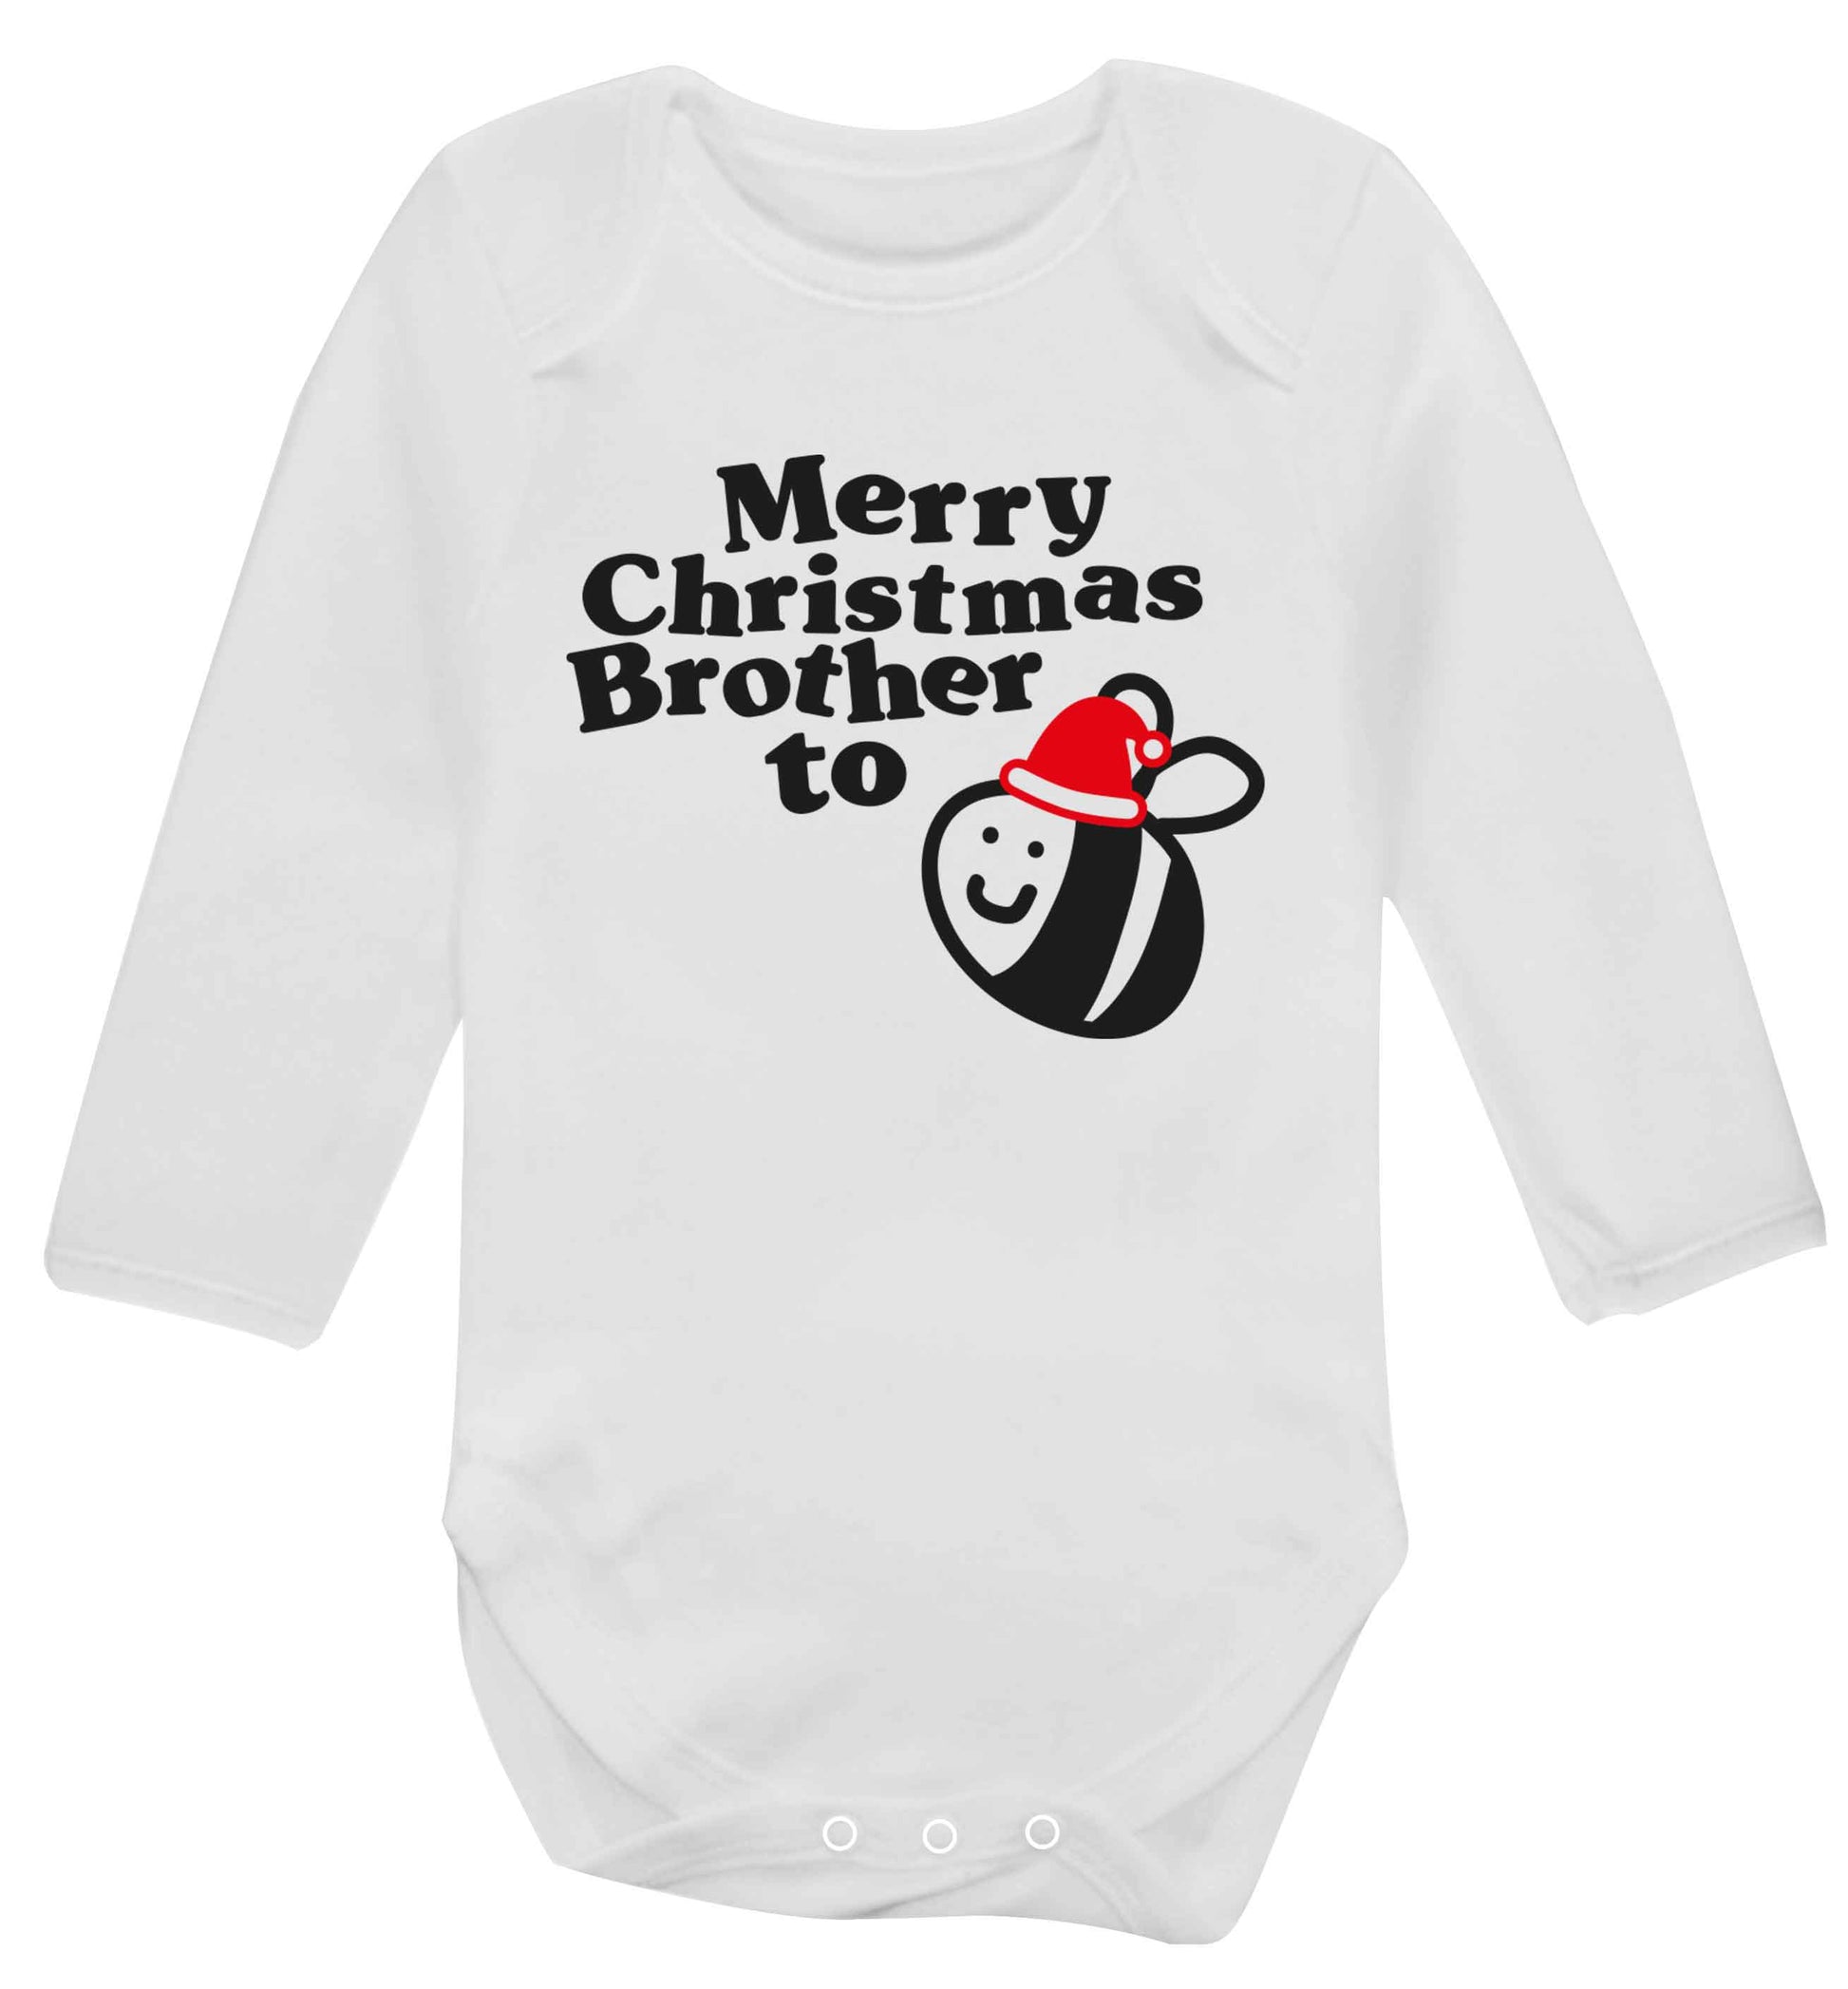 Merry Christmas brother to be Baby Vest long sleeved white 6-12 months